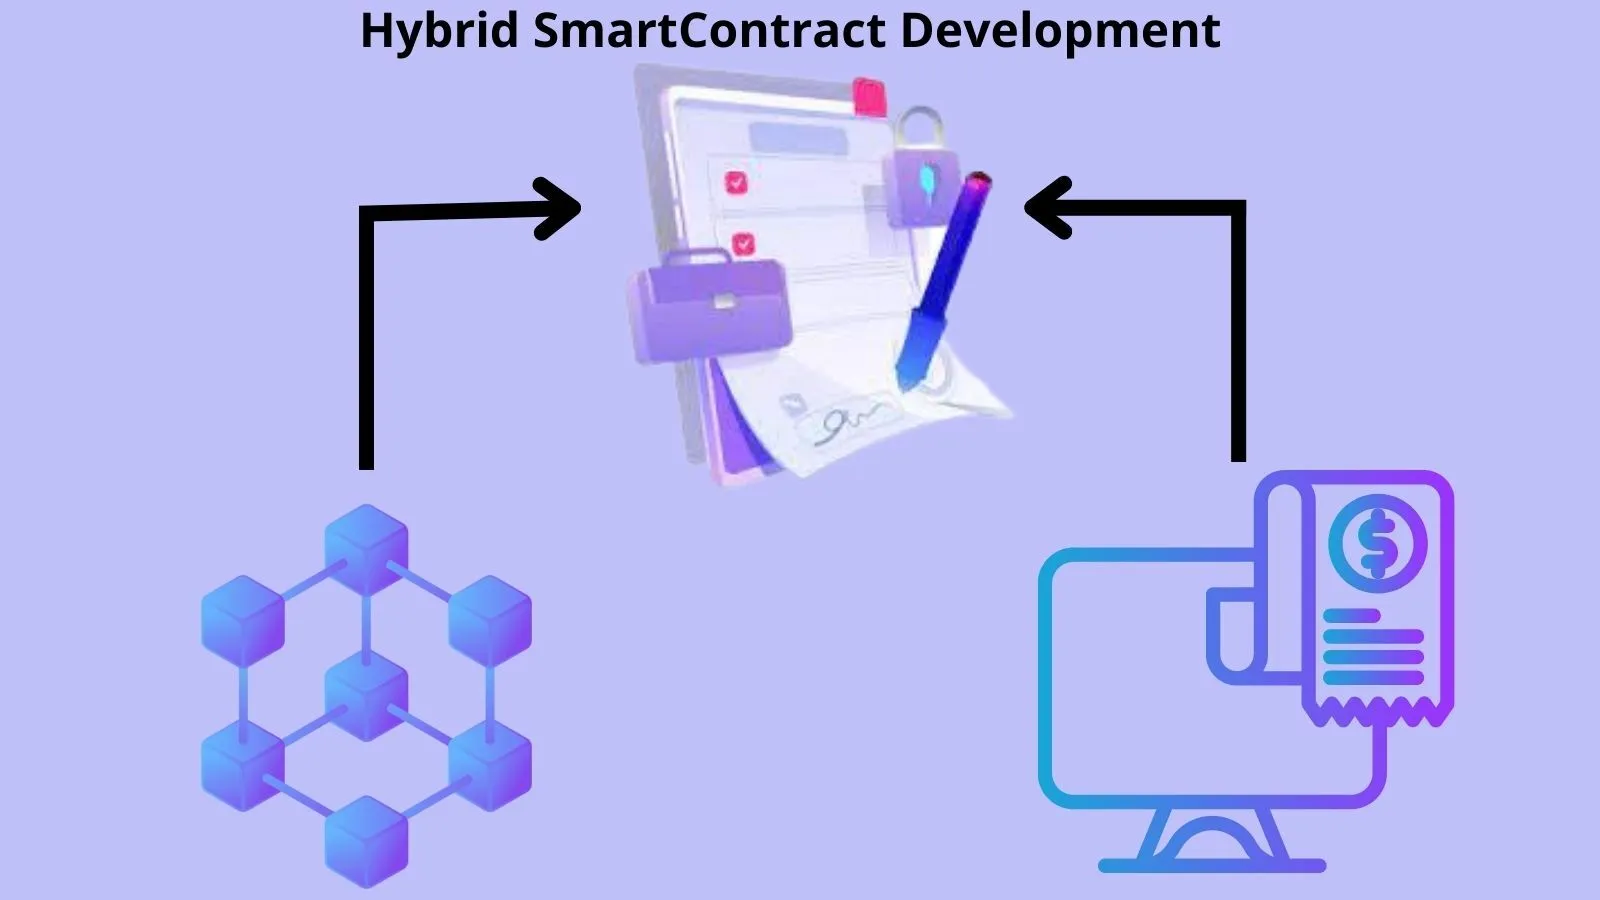 Hybrid Smart Contracts: Are They Good?